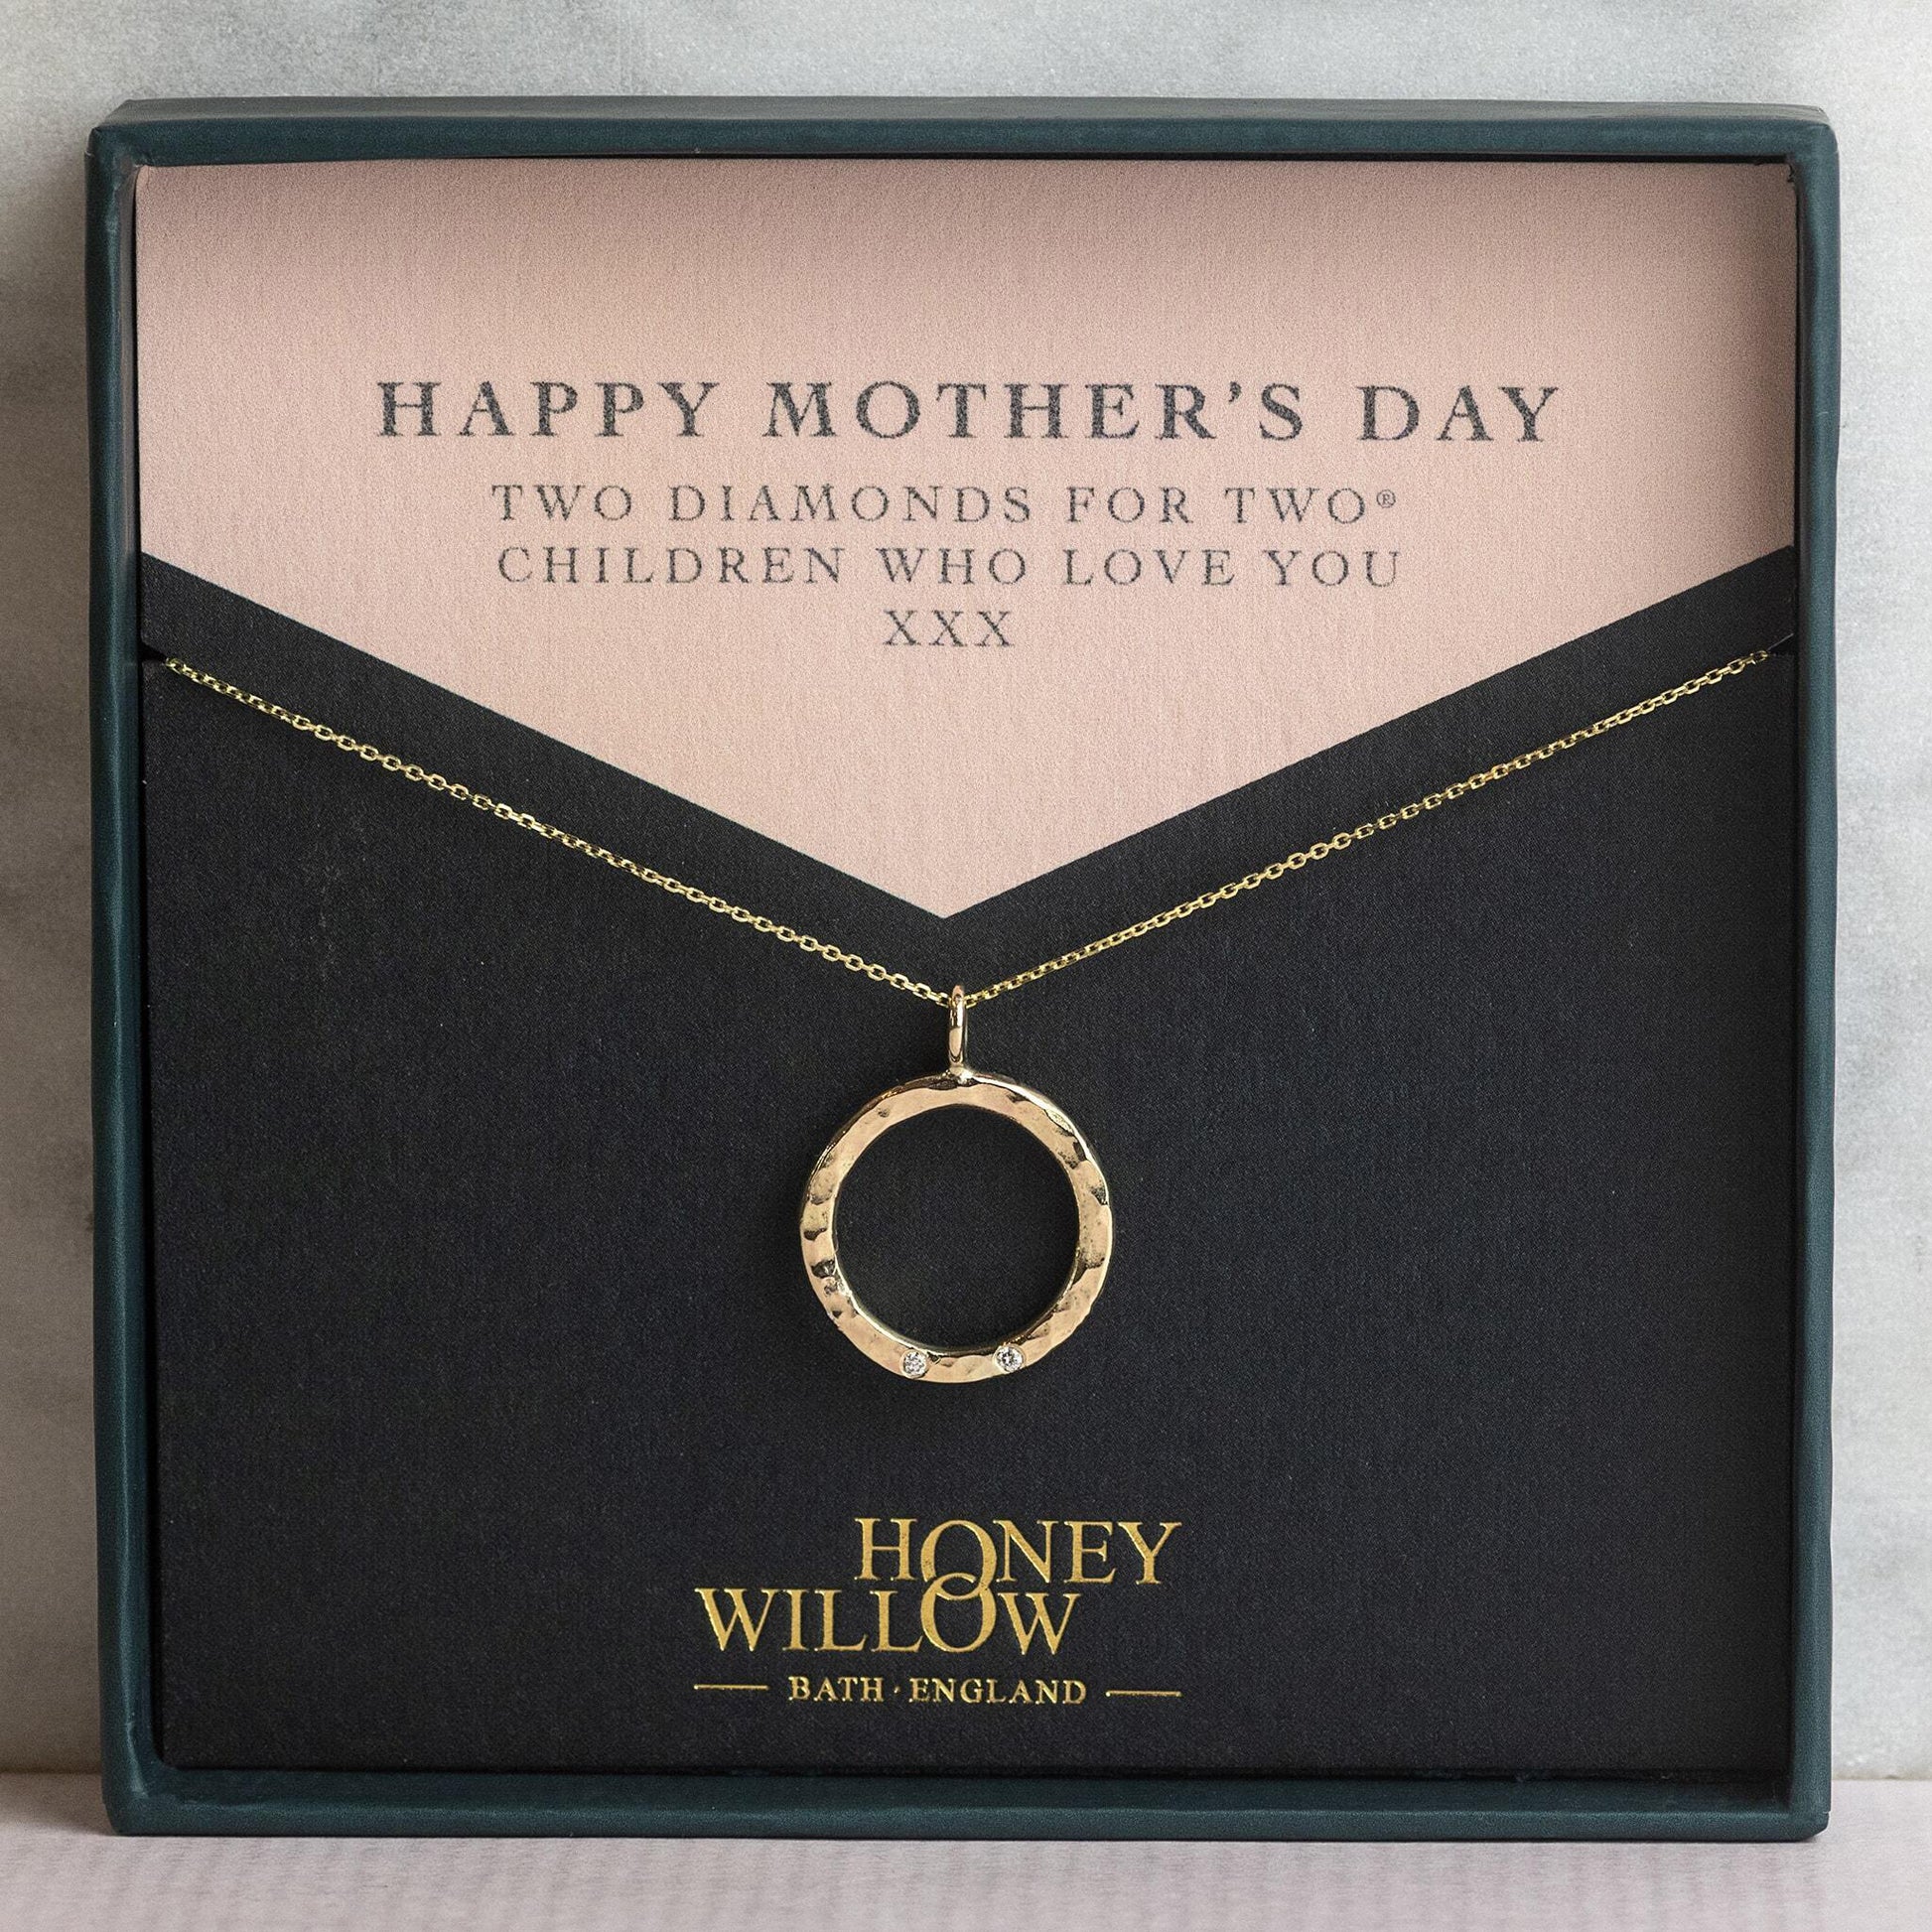 Mother's Day Gift - Recycled 9kt Gold Diamond Halo Necklace - 2 Diamonds for 2® Children